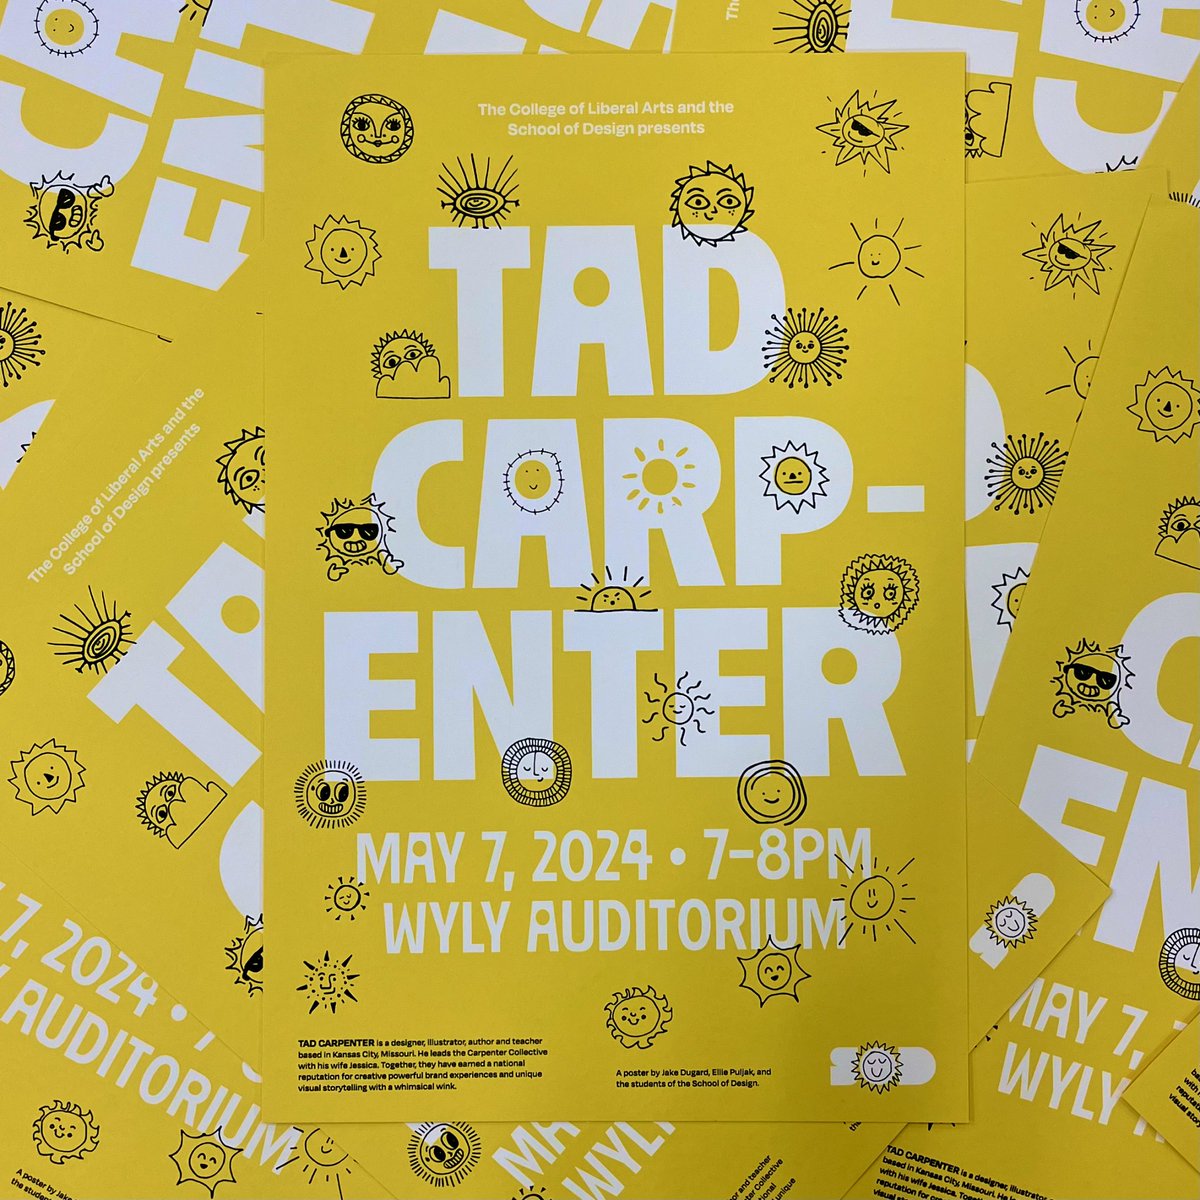 Screenprinted some posters for @TadCarpenter.